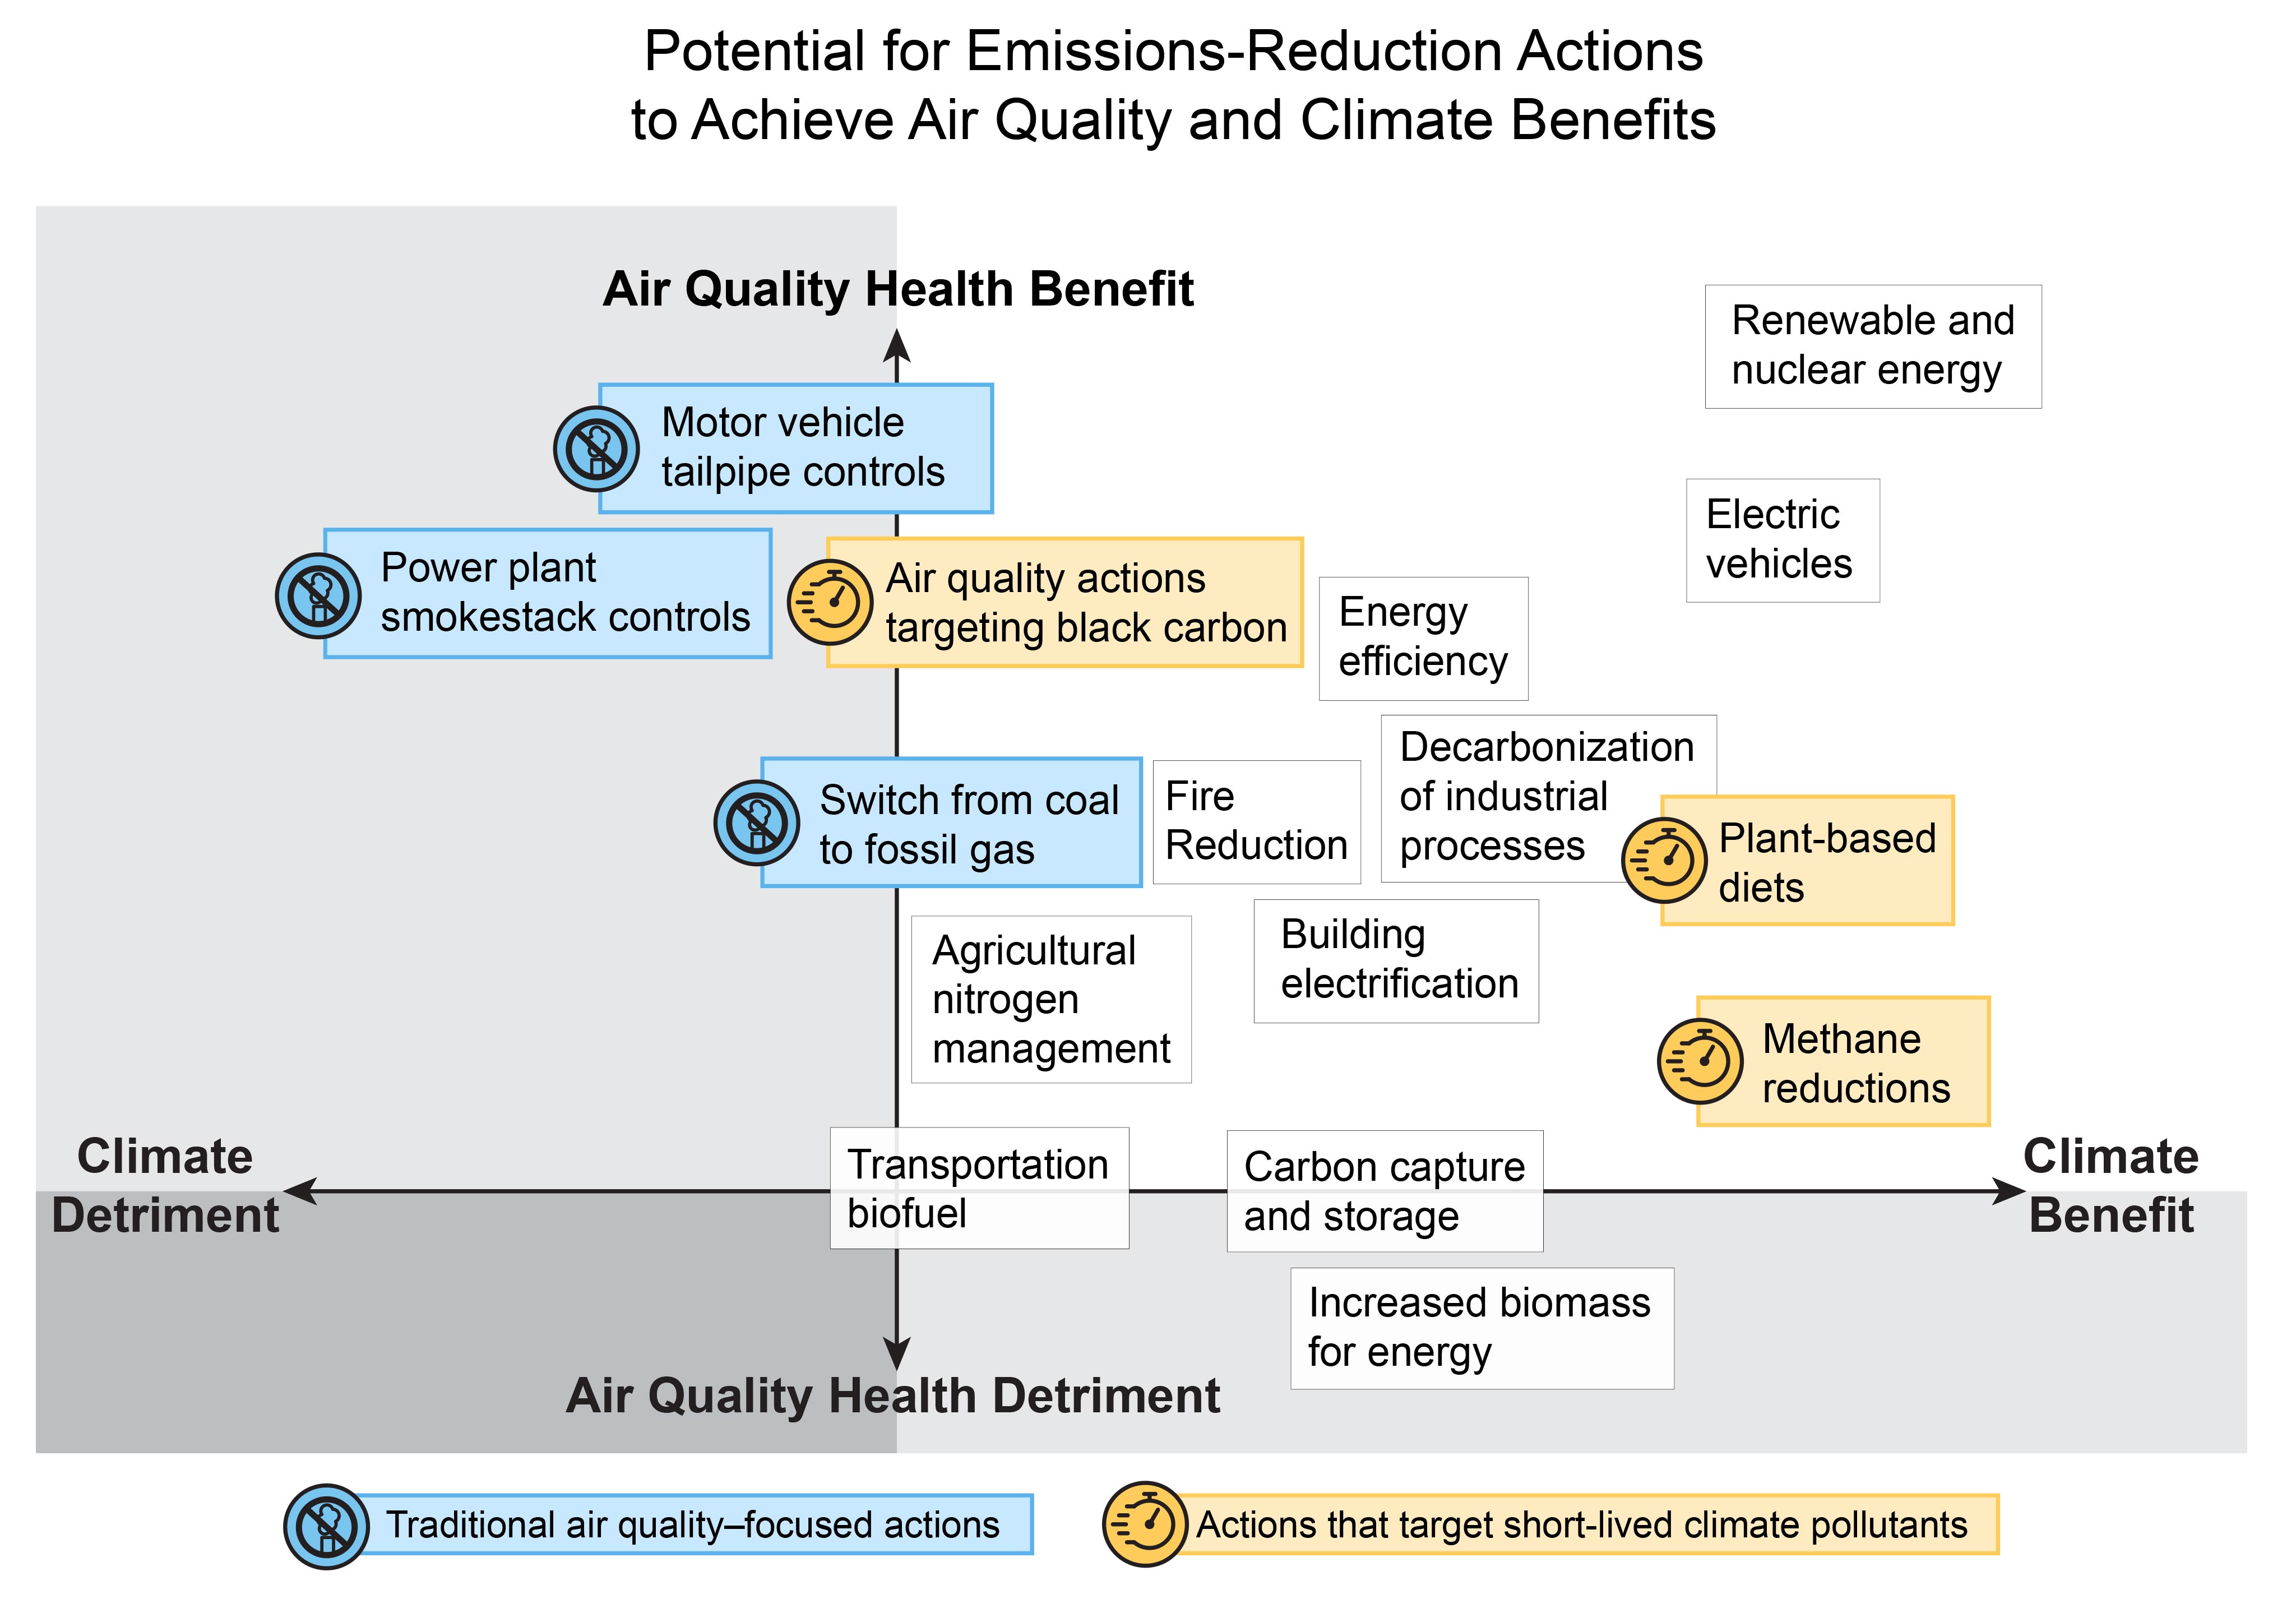 Potential for Emissions-Reduction Actions to Achieve Air Quality and Climate Benefits